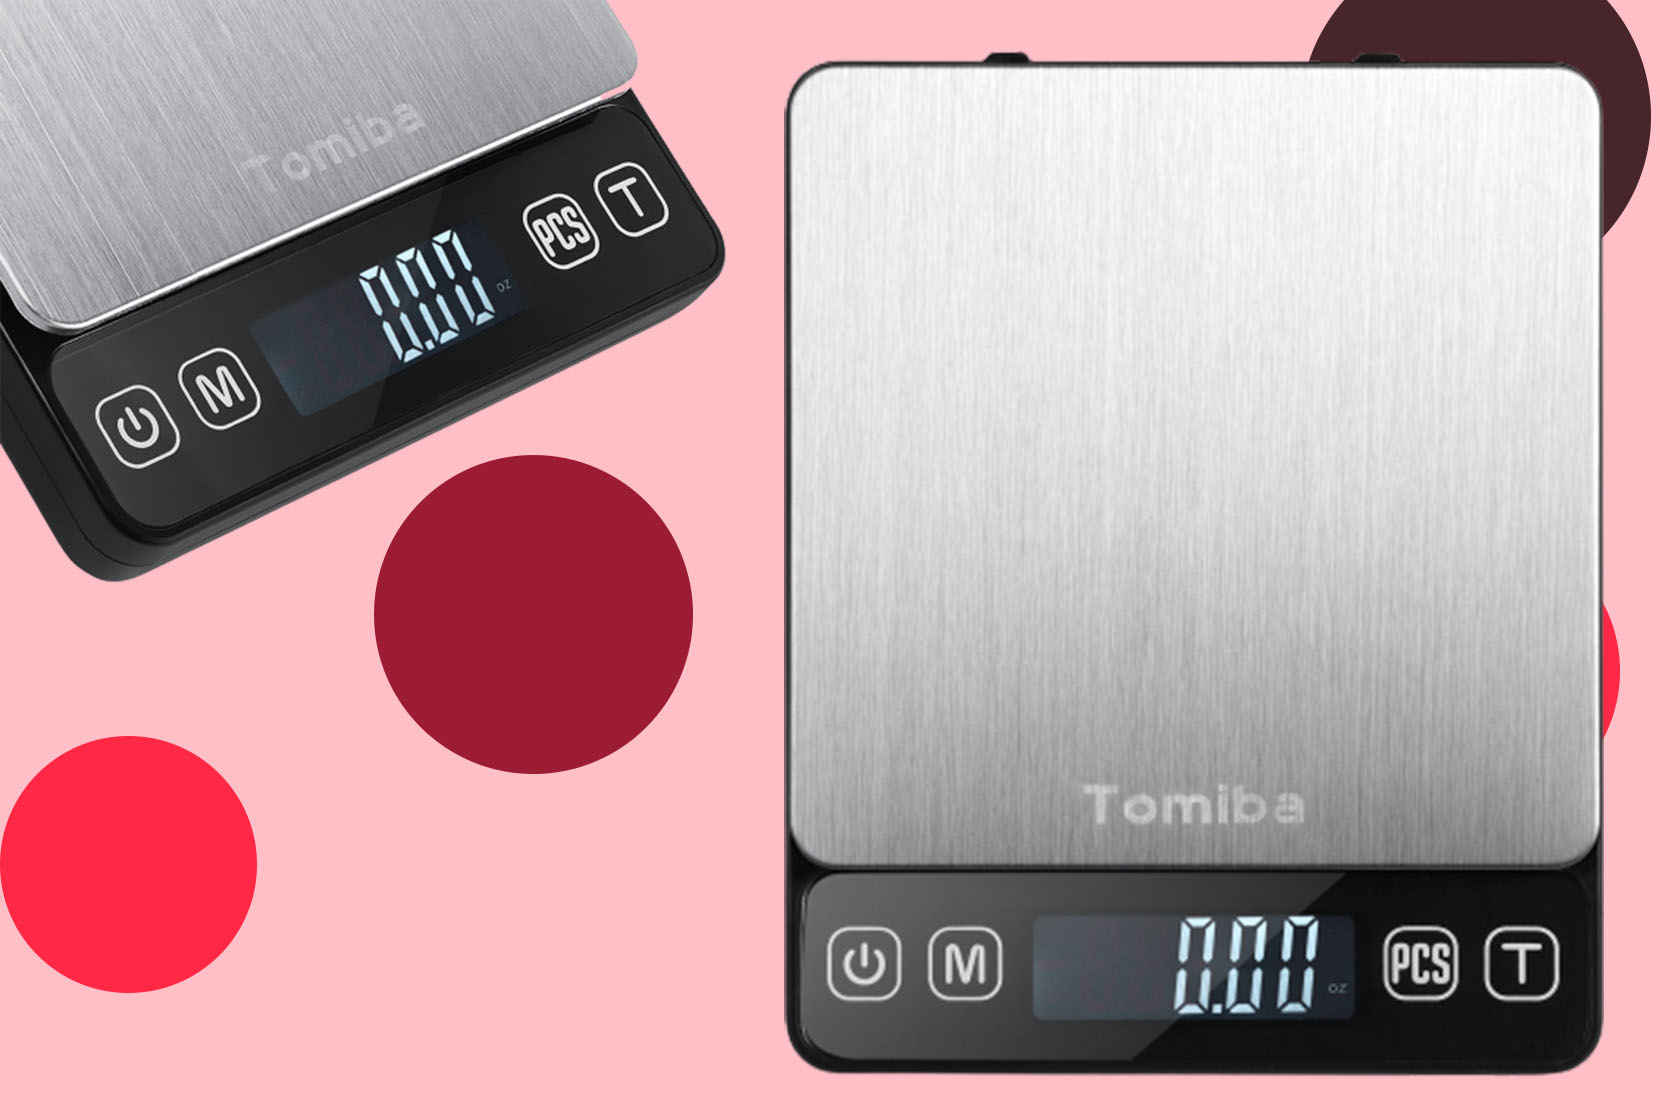 Save 50% on a digital food scale with this deal from